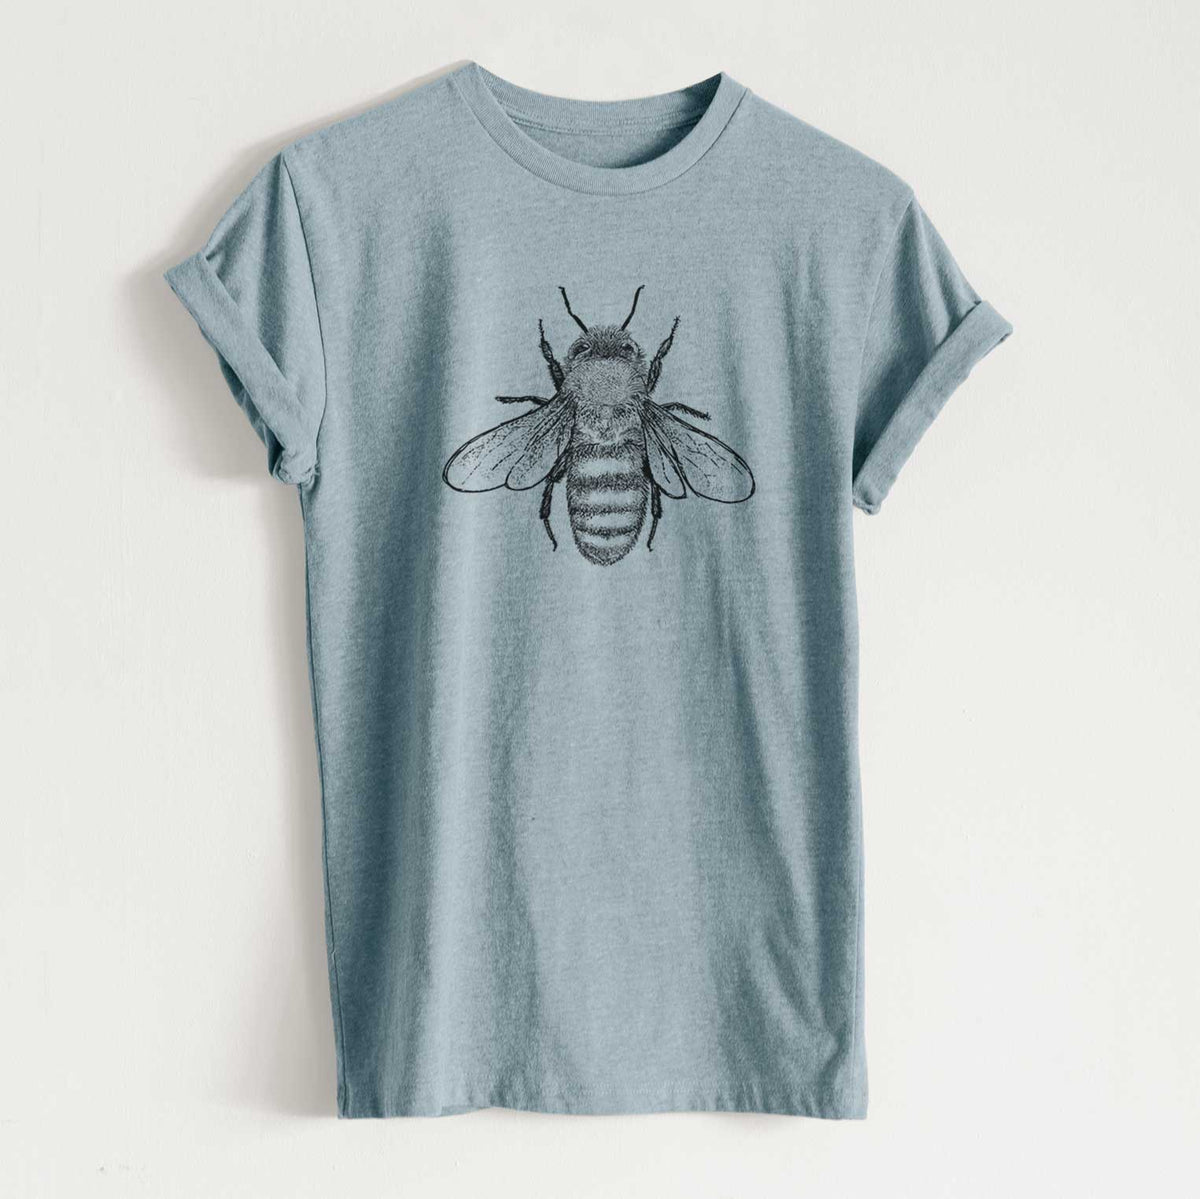 Apis Mellifera - Honey Bee - Unisex Recycled Eco Tee  - CLOSEOUT - FINAL SALE